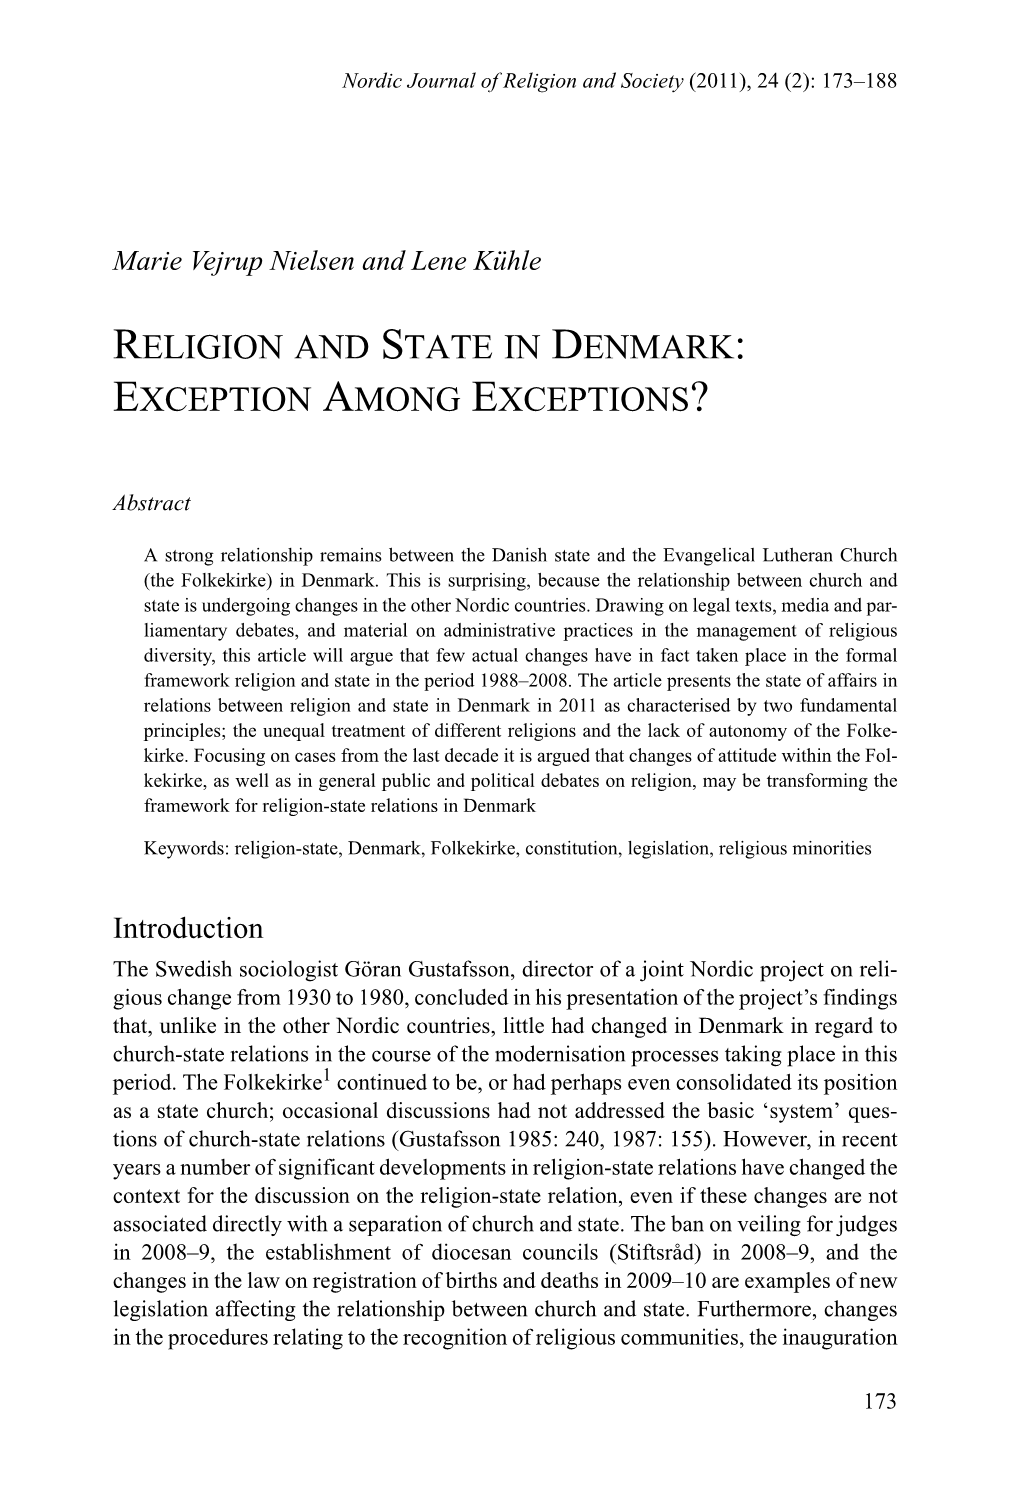 Religion and State in Denmark: Exception Among Exceptions?